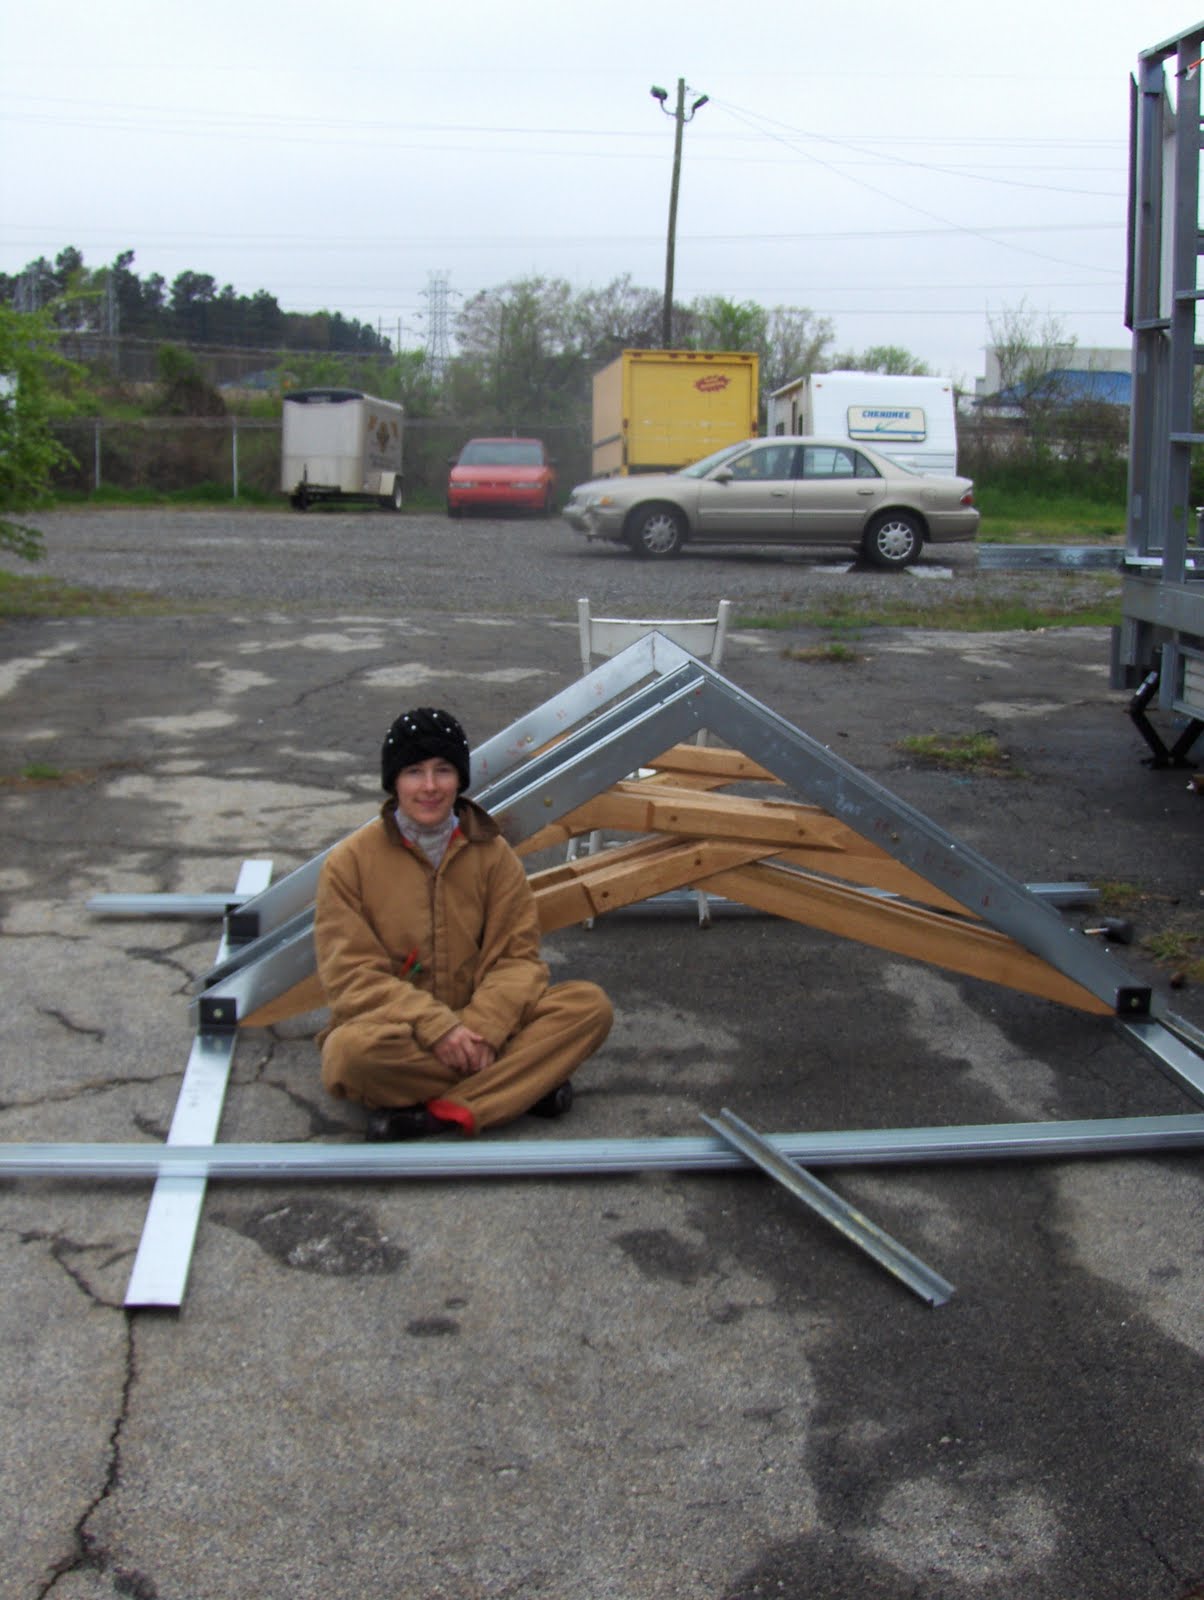 Building a Homemade Solar Powered Travel Trailer From the